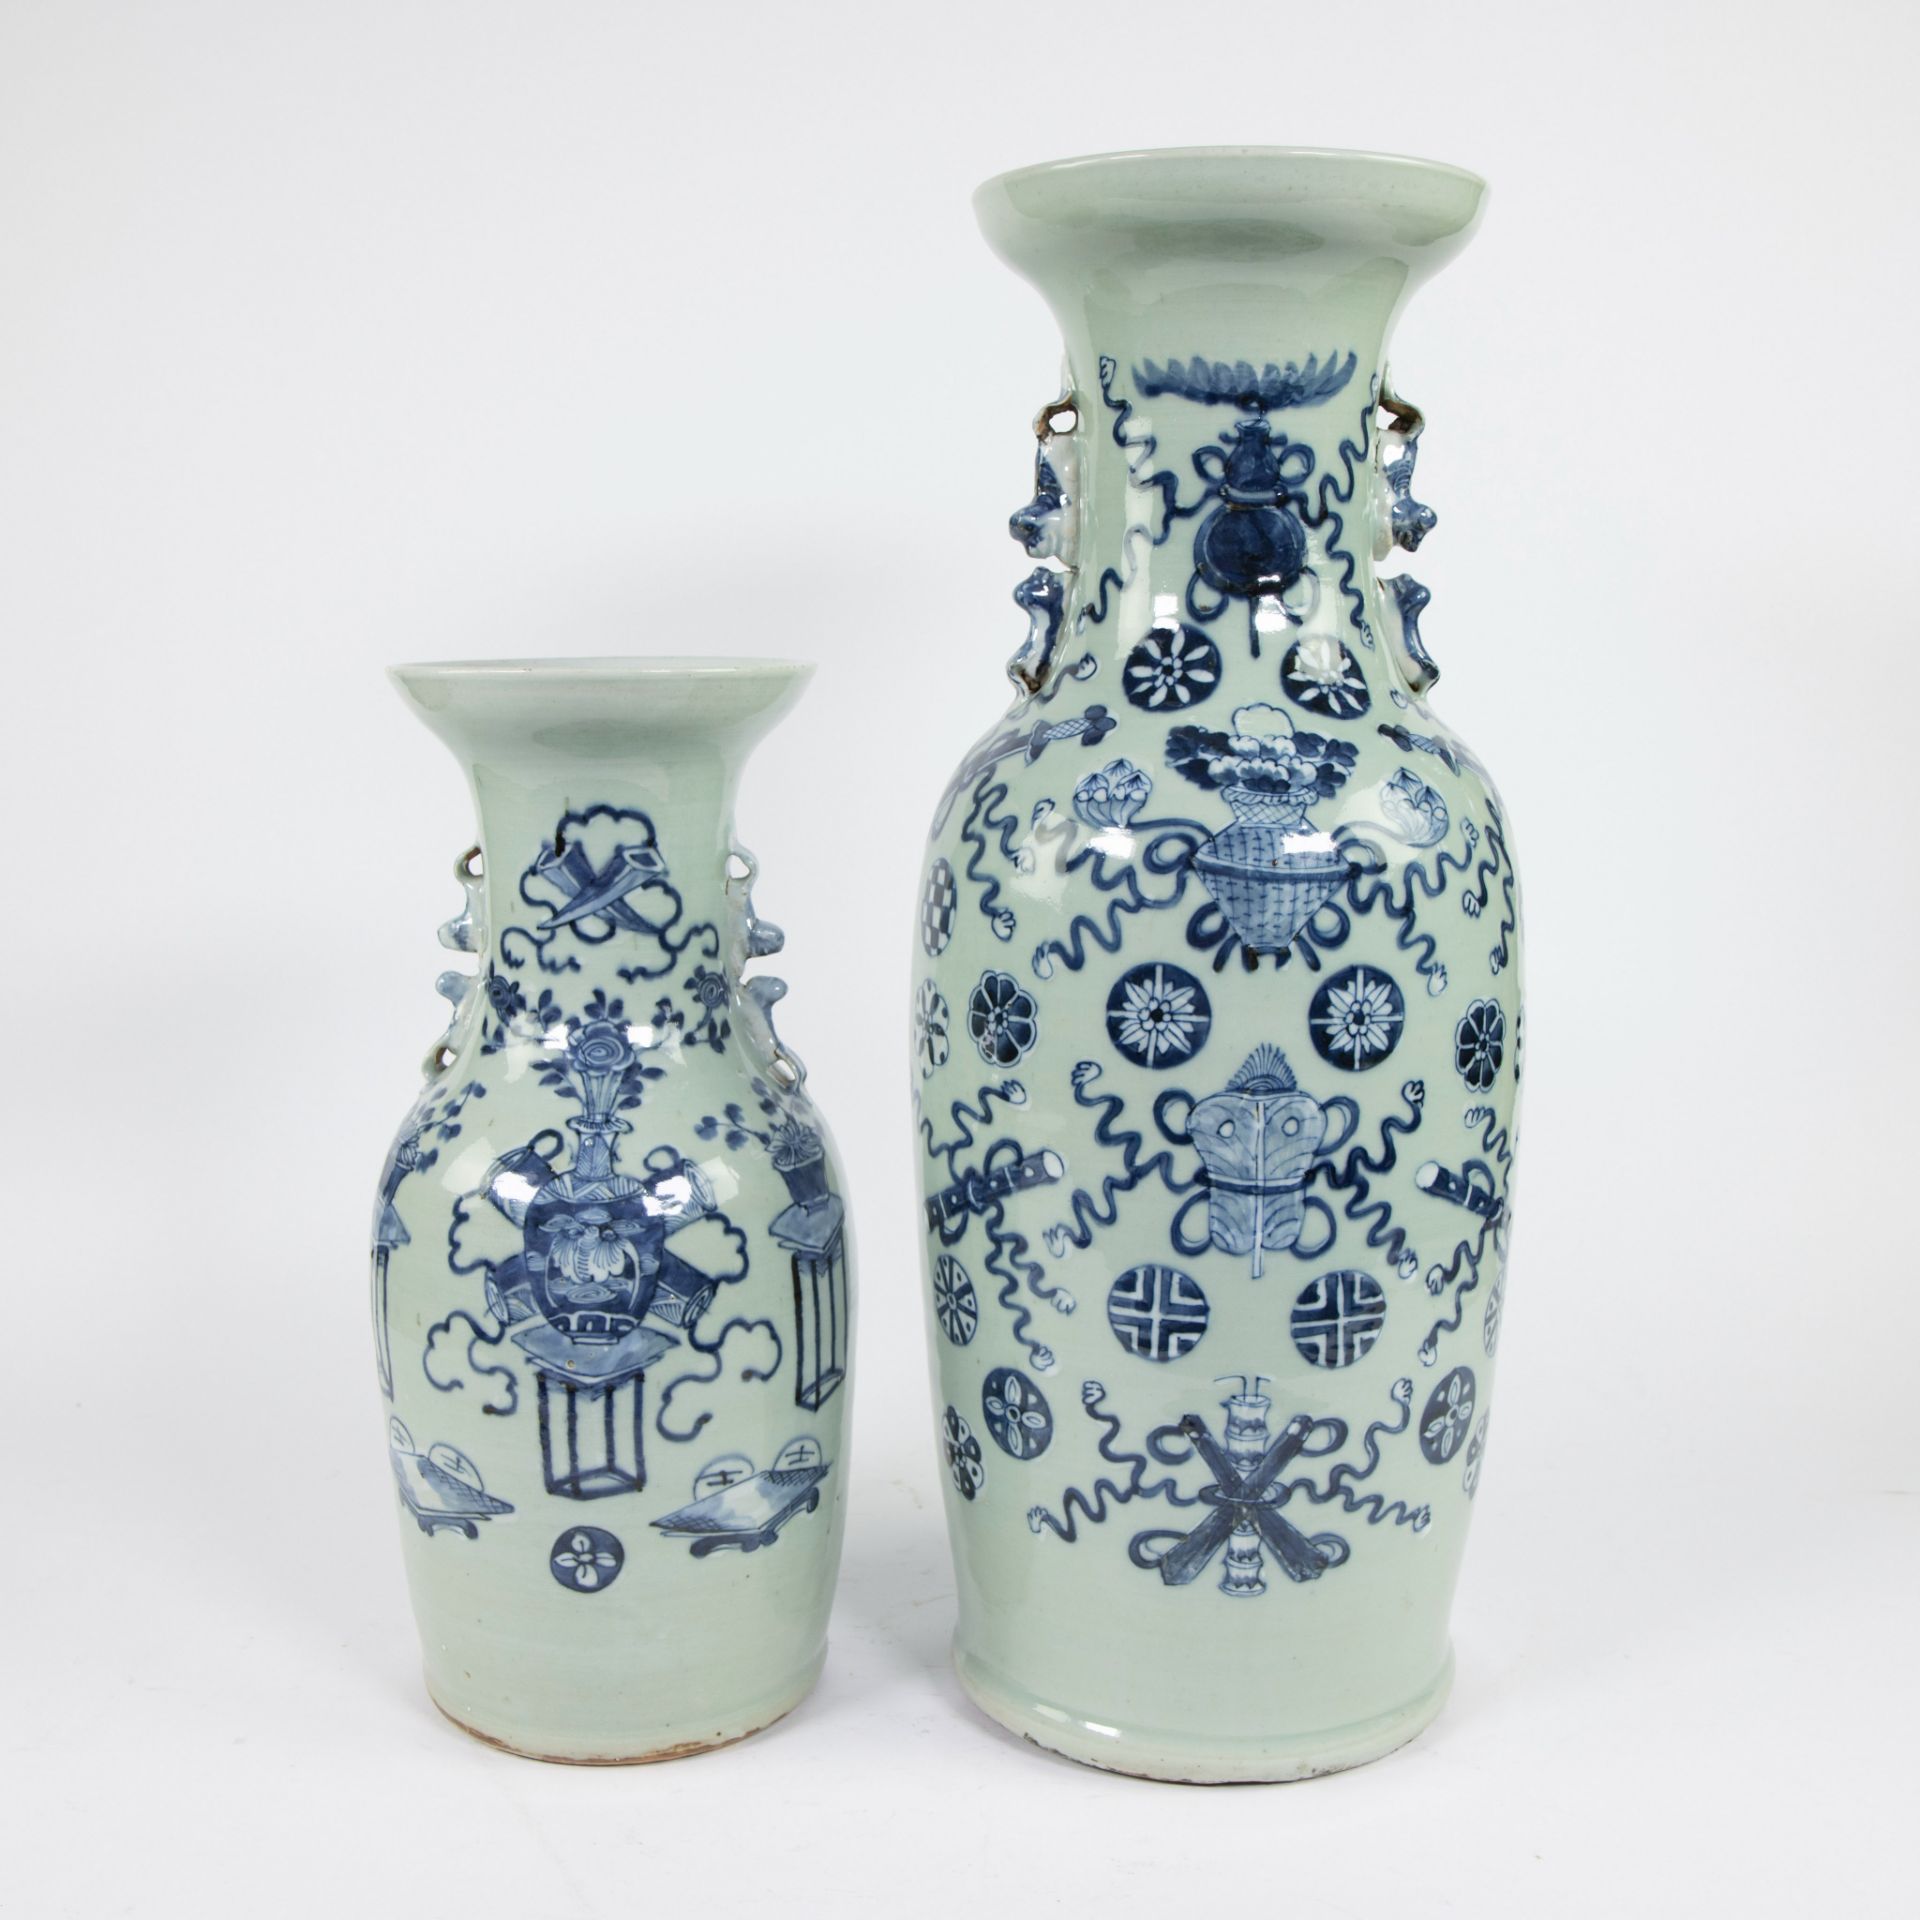 3 Chinese celadon vases late 19th century - Image 8 of 11